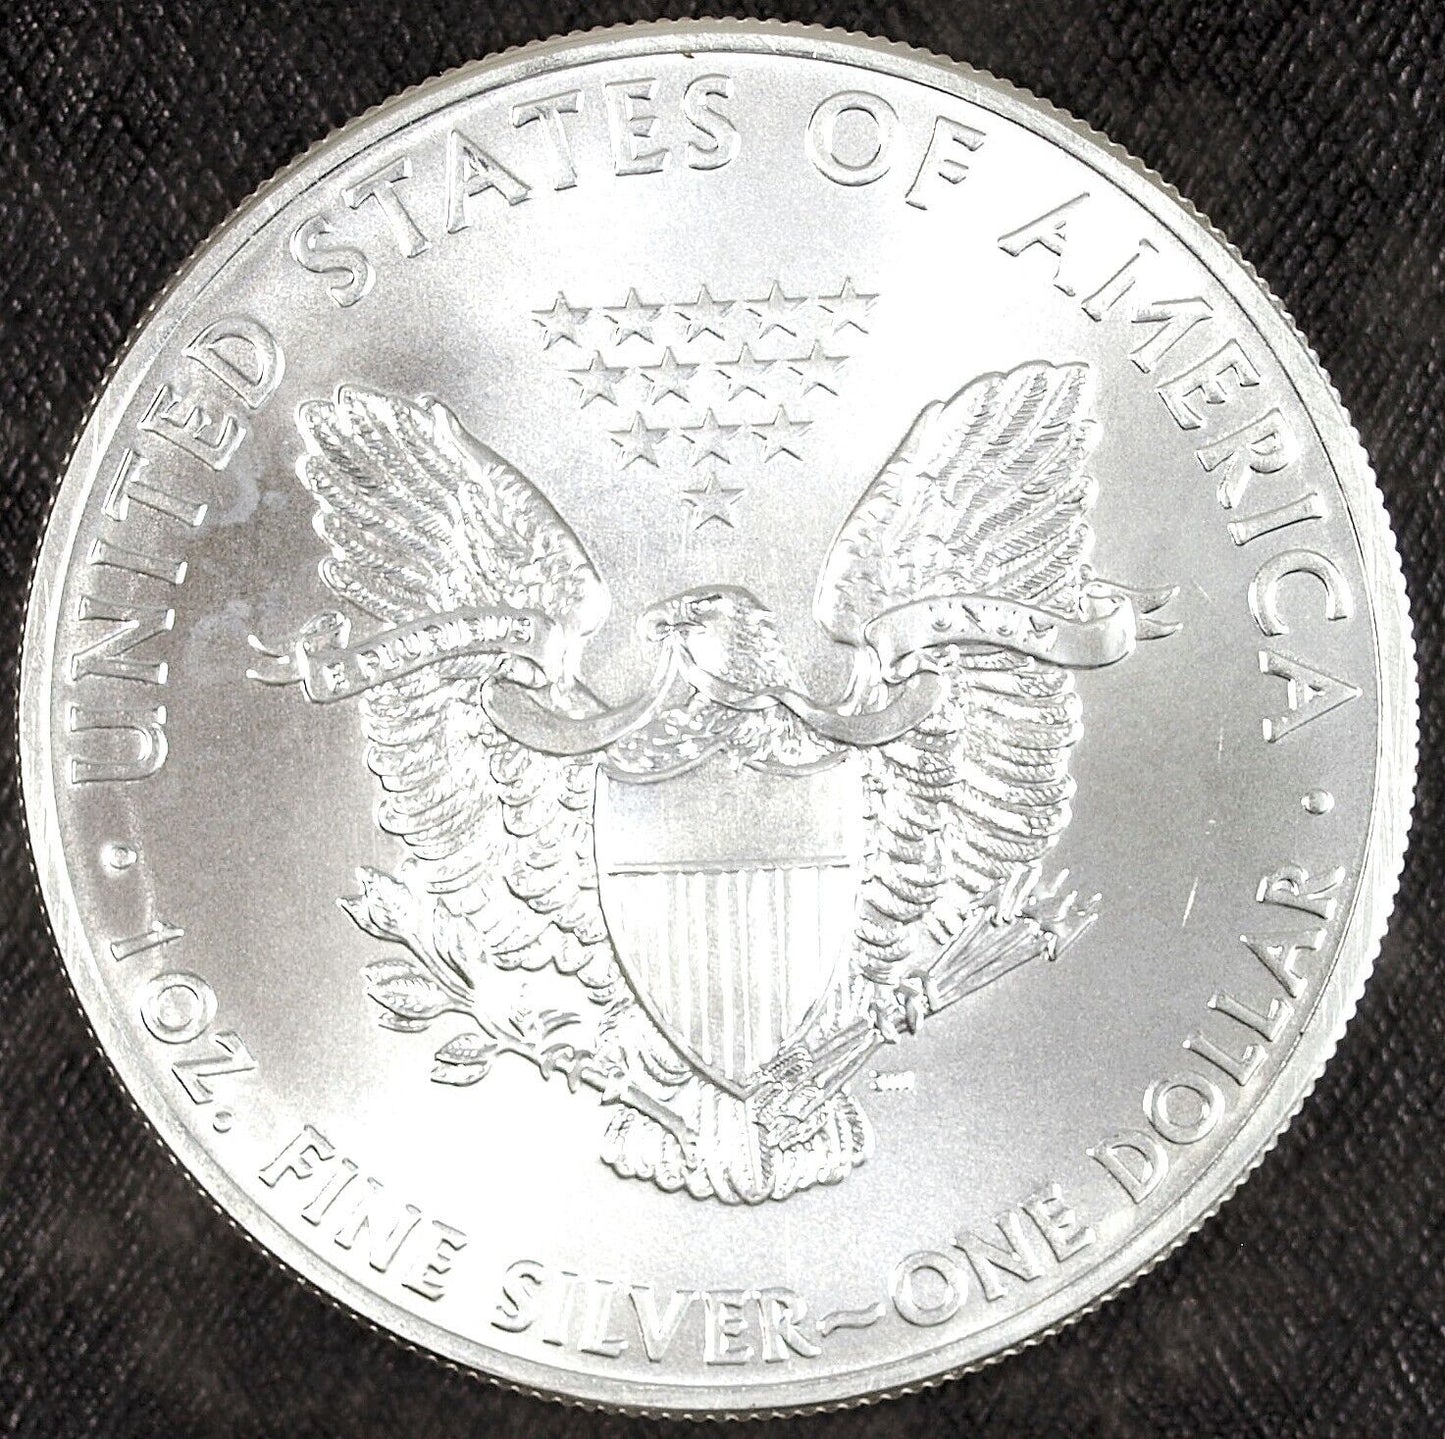 2012 U.S. Mint American Silver Eagle ☆☆ Uncirculated ☆☆ Great Collectible 418